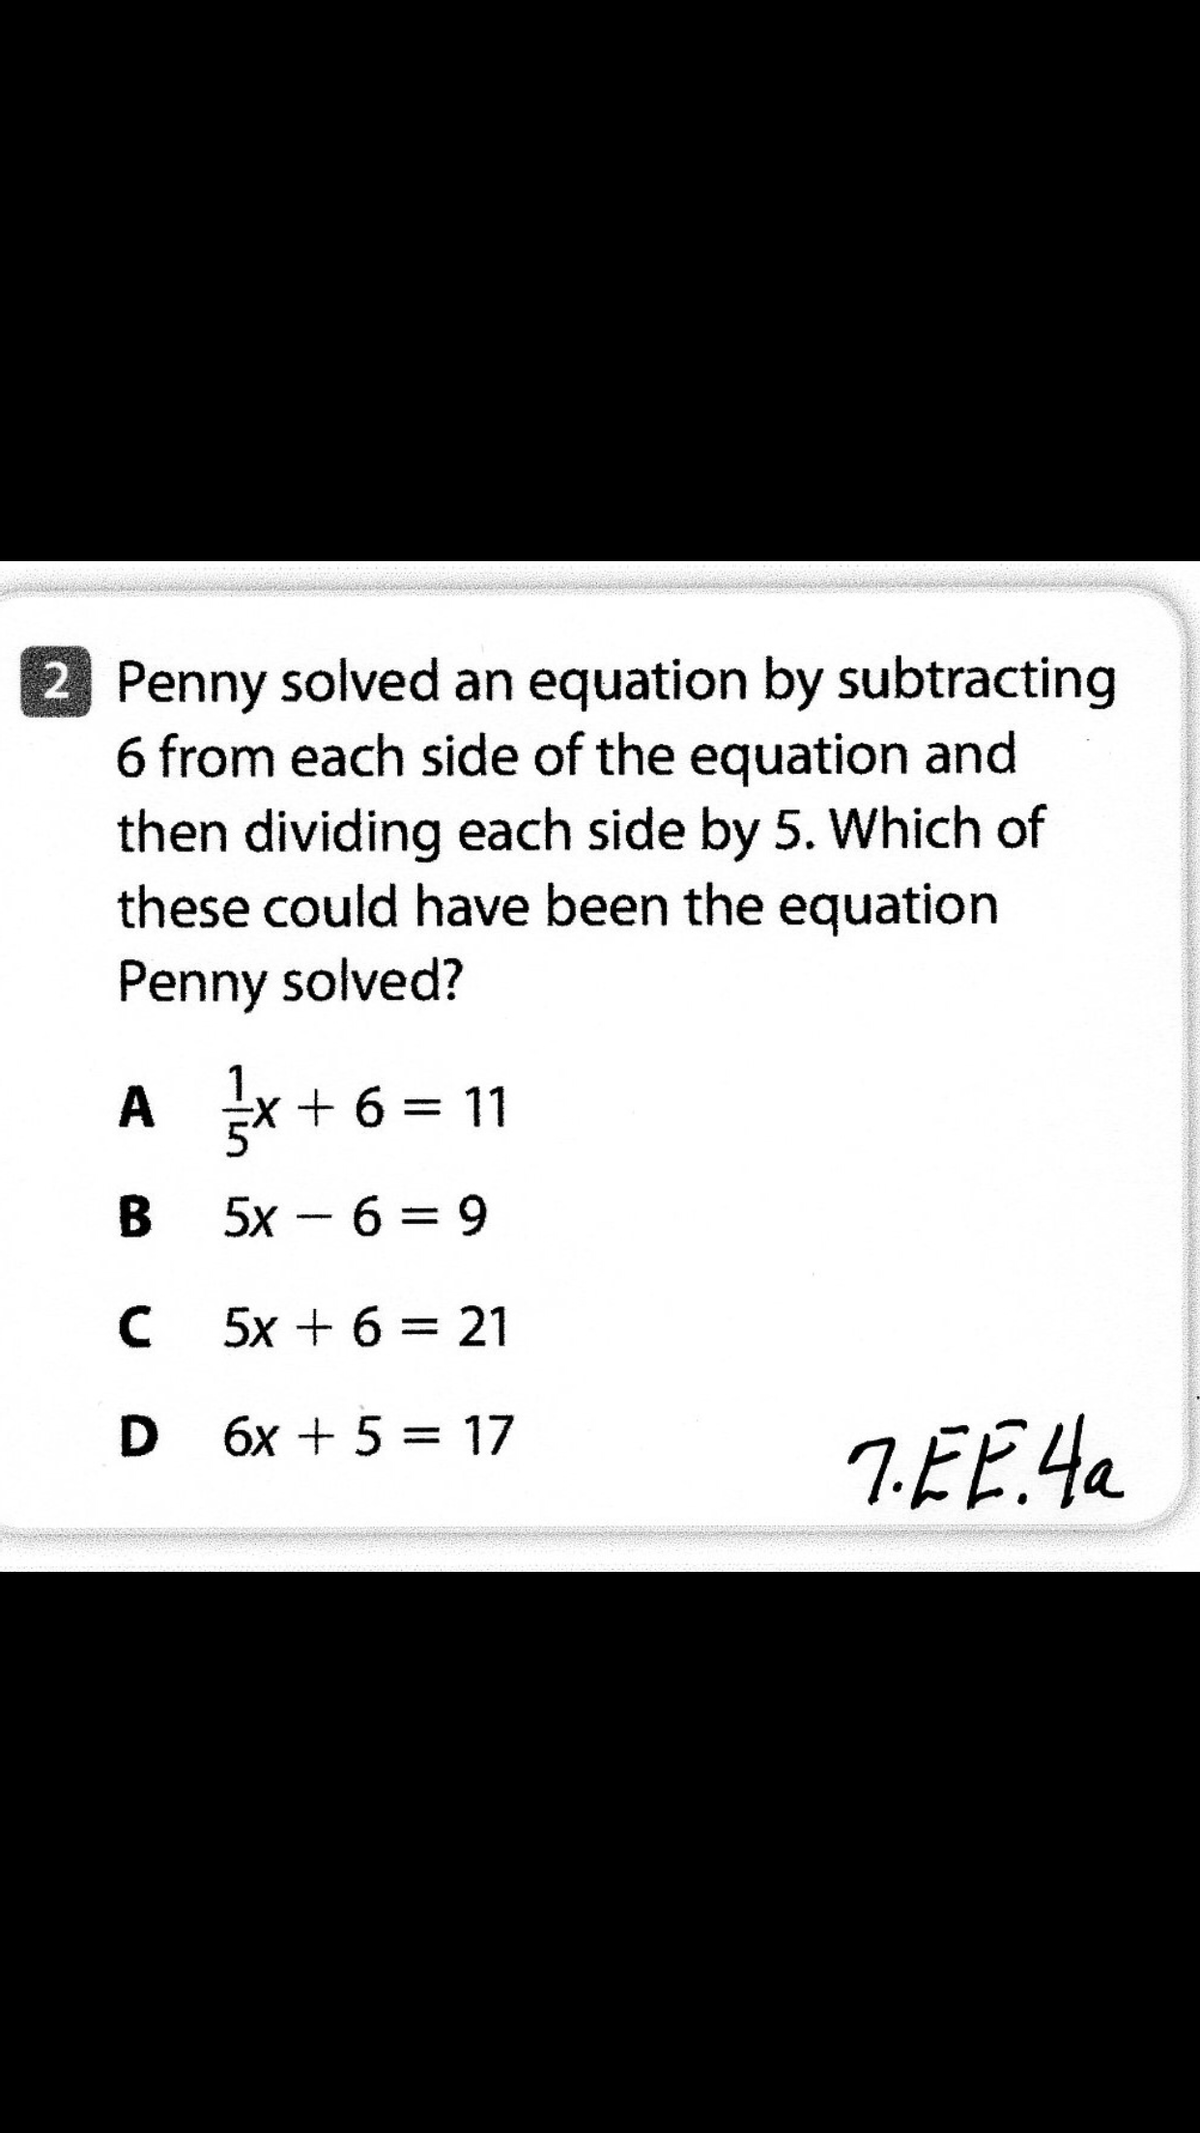 2 Penny solved an equation by subtracting
6 from each side of the equation and
then dividing each side by 5. Which of
these could have been the equation
Penny solved?
A x + 6 =
11
B 5x - 6 = 9
5x + 6 = 21
D 6x + 5 = 17
7.EE.4a
